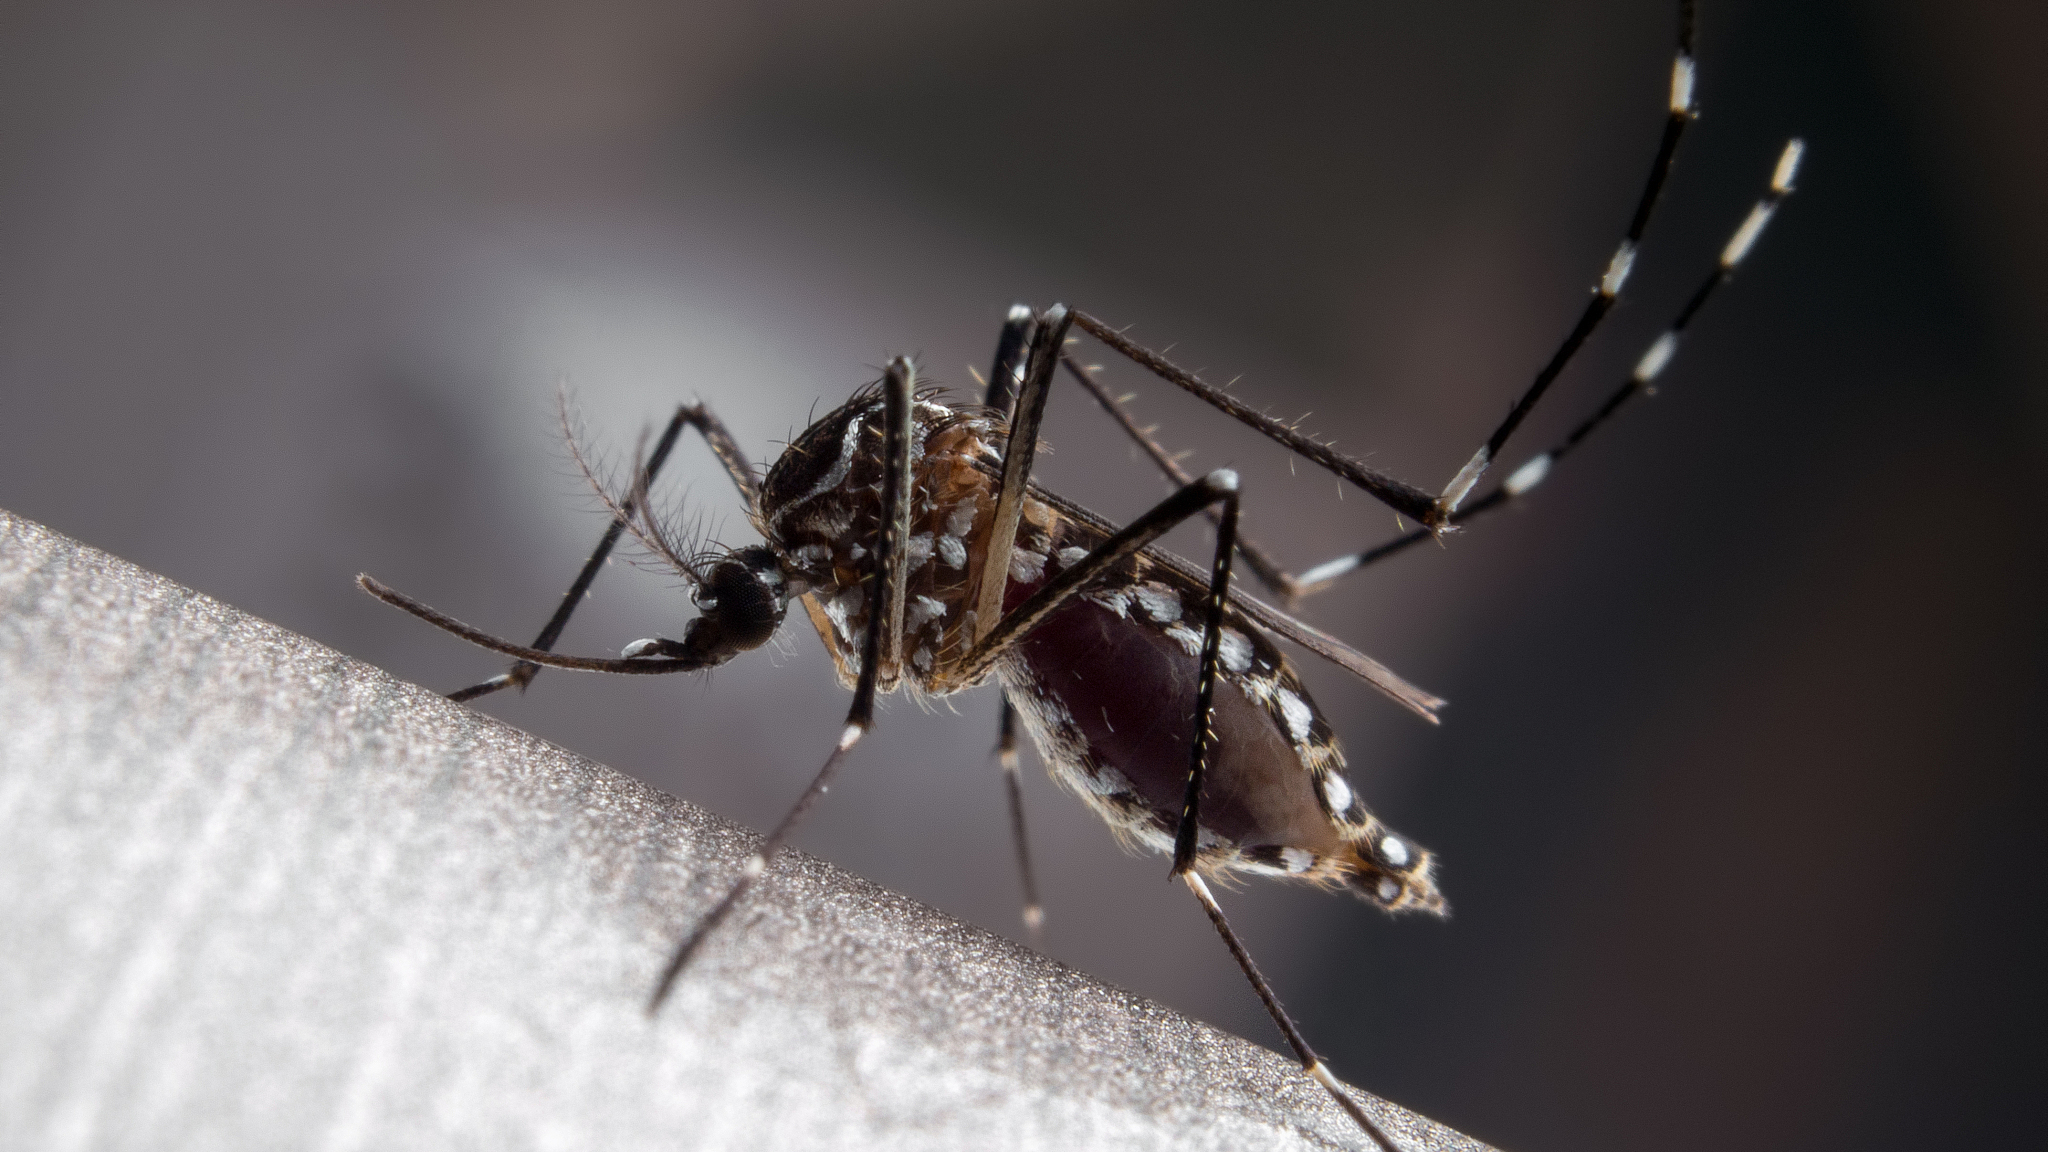 Dengue is a mosquito-borne flavivirus disease that affects nearly half the world's population. /CFP